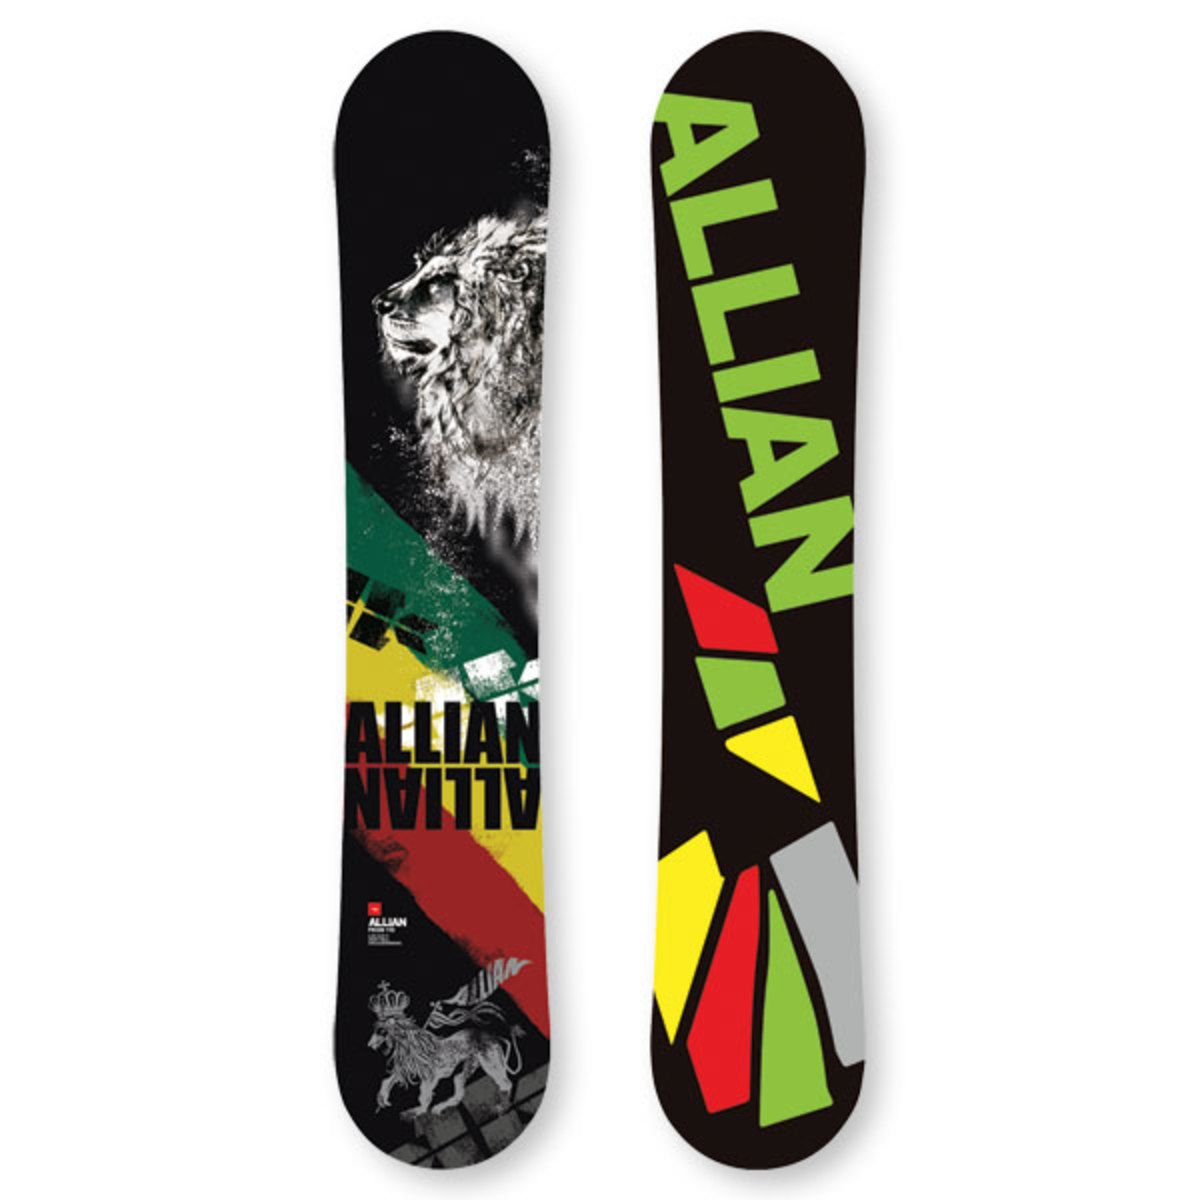 Buy Allian Prism Snowboard - Shop for Snowboard Gear at